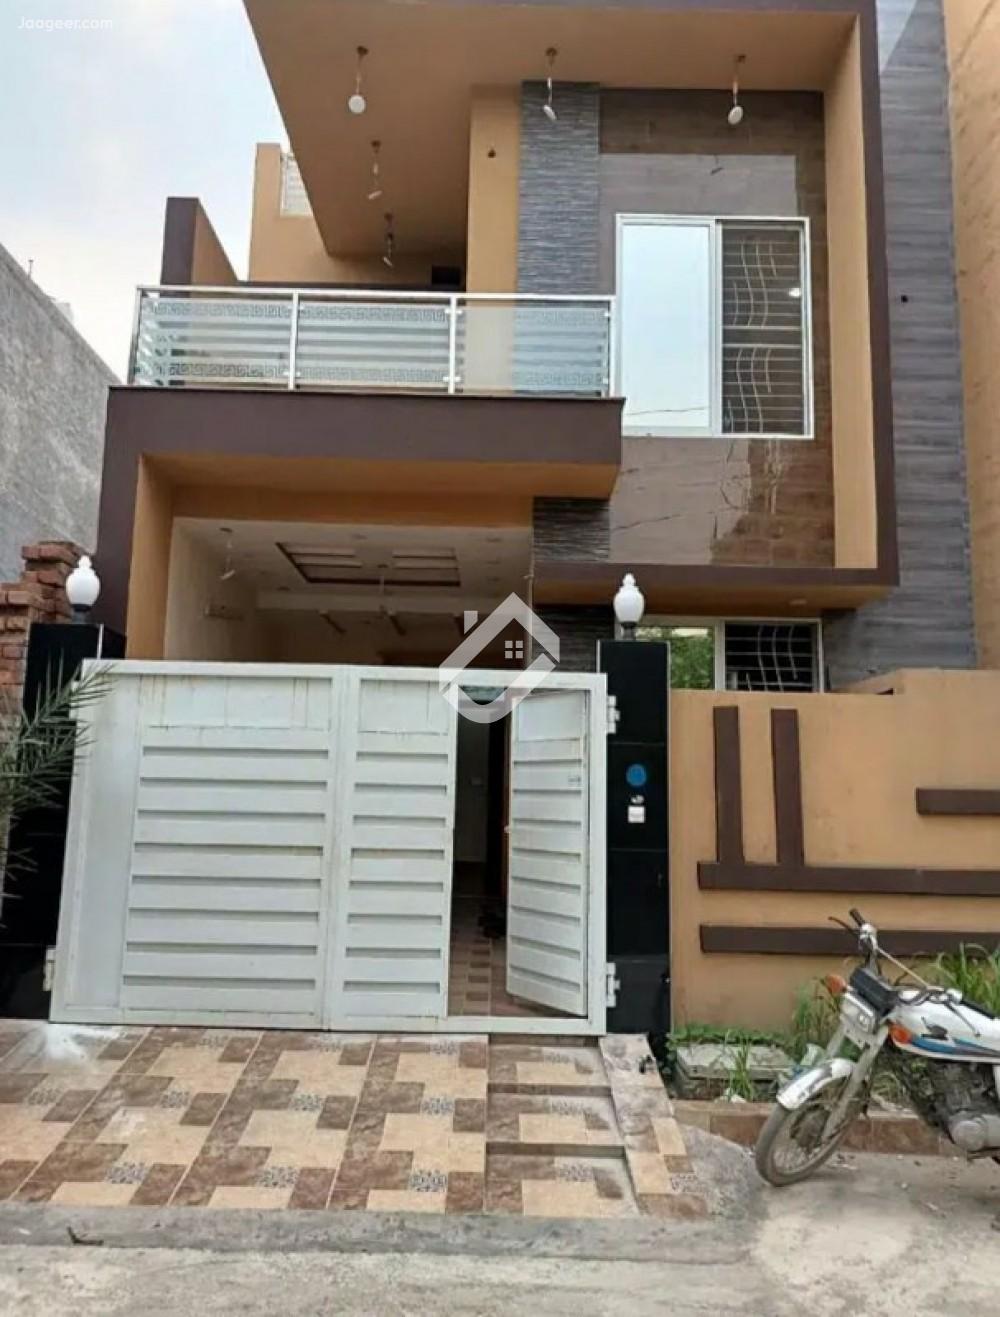 Main image 5 Marla Double Storey House For Sale In Lake City  Lake City, Lahore